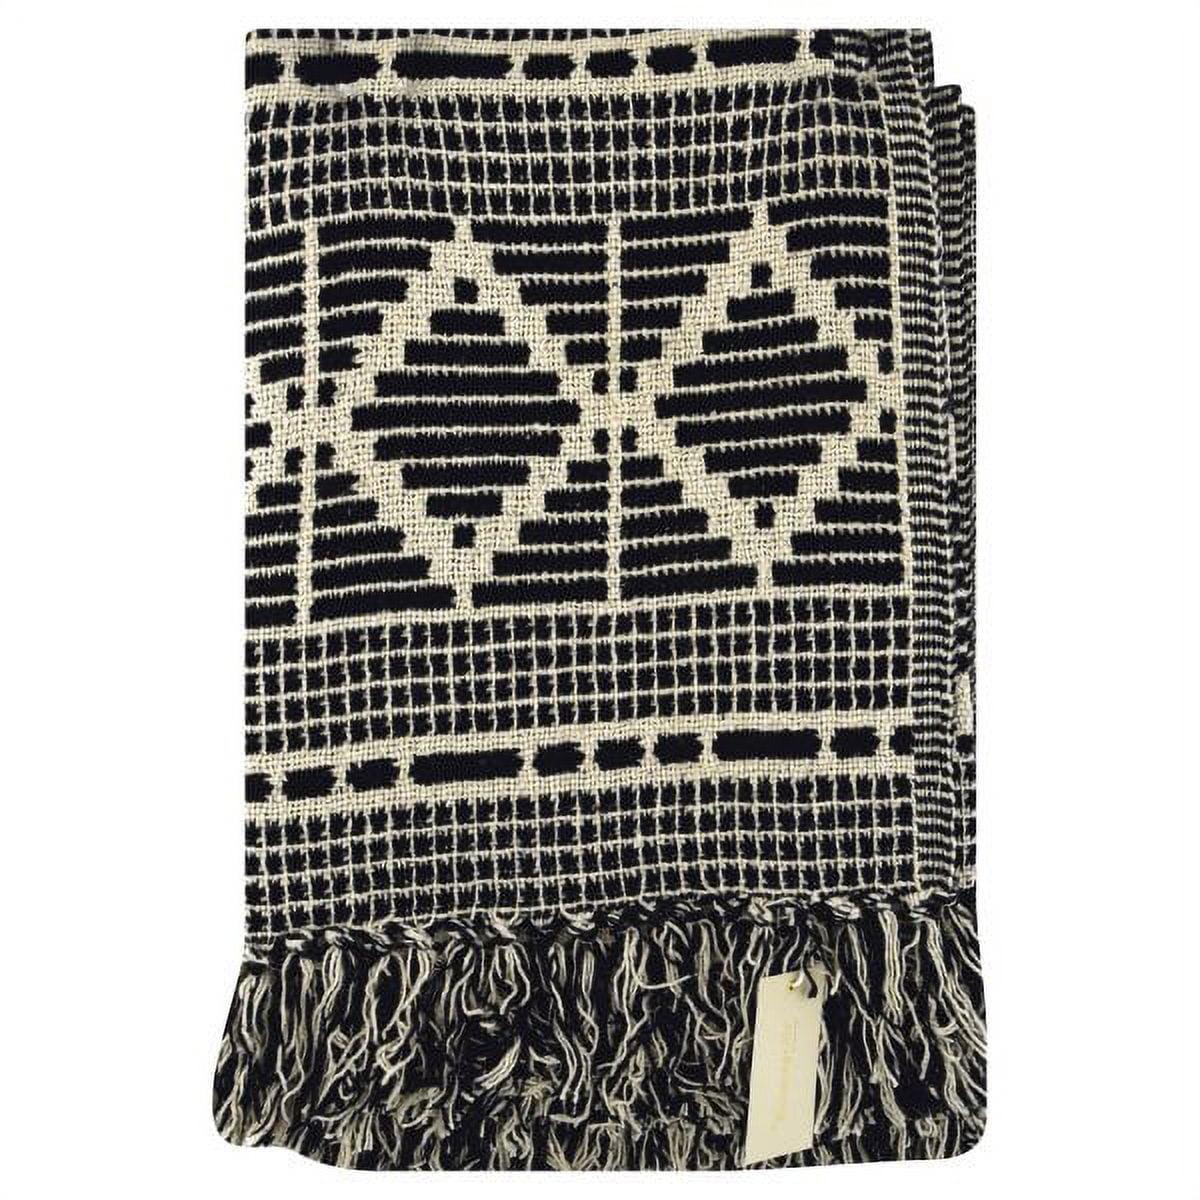 Bloomingville Black & Beige Diamond-Patterned Cotton Blend Throw with Fringe